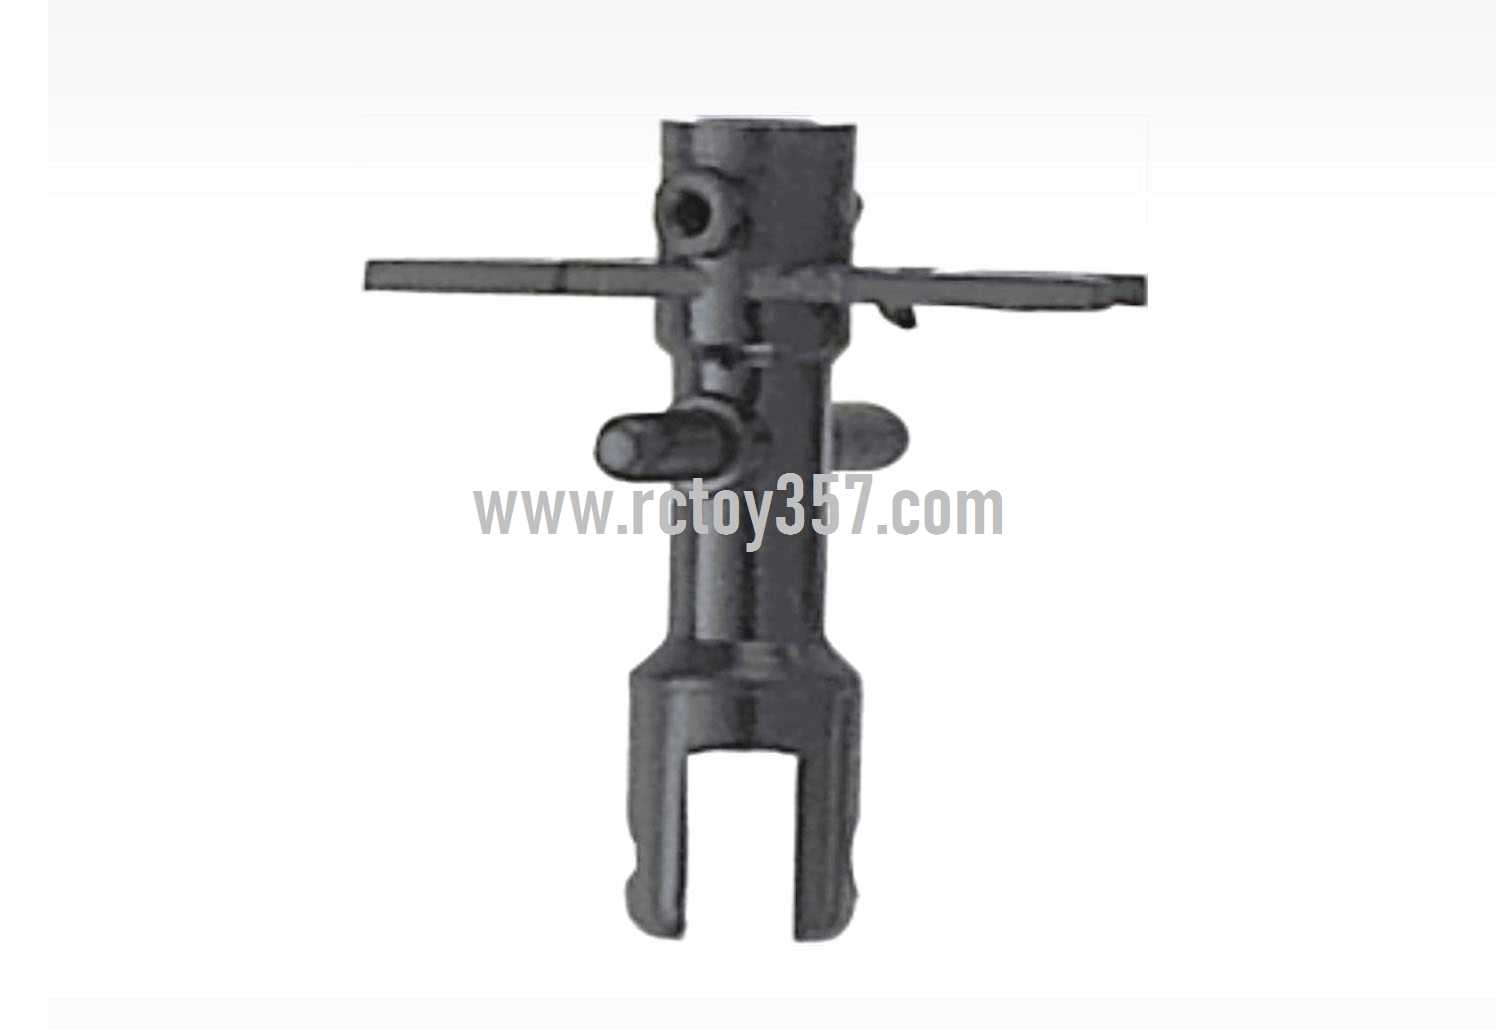 RCToy357.com - Shuang Ma/Double Hors 9103 toy Parts Inner shelf